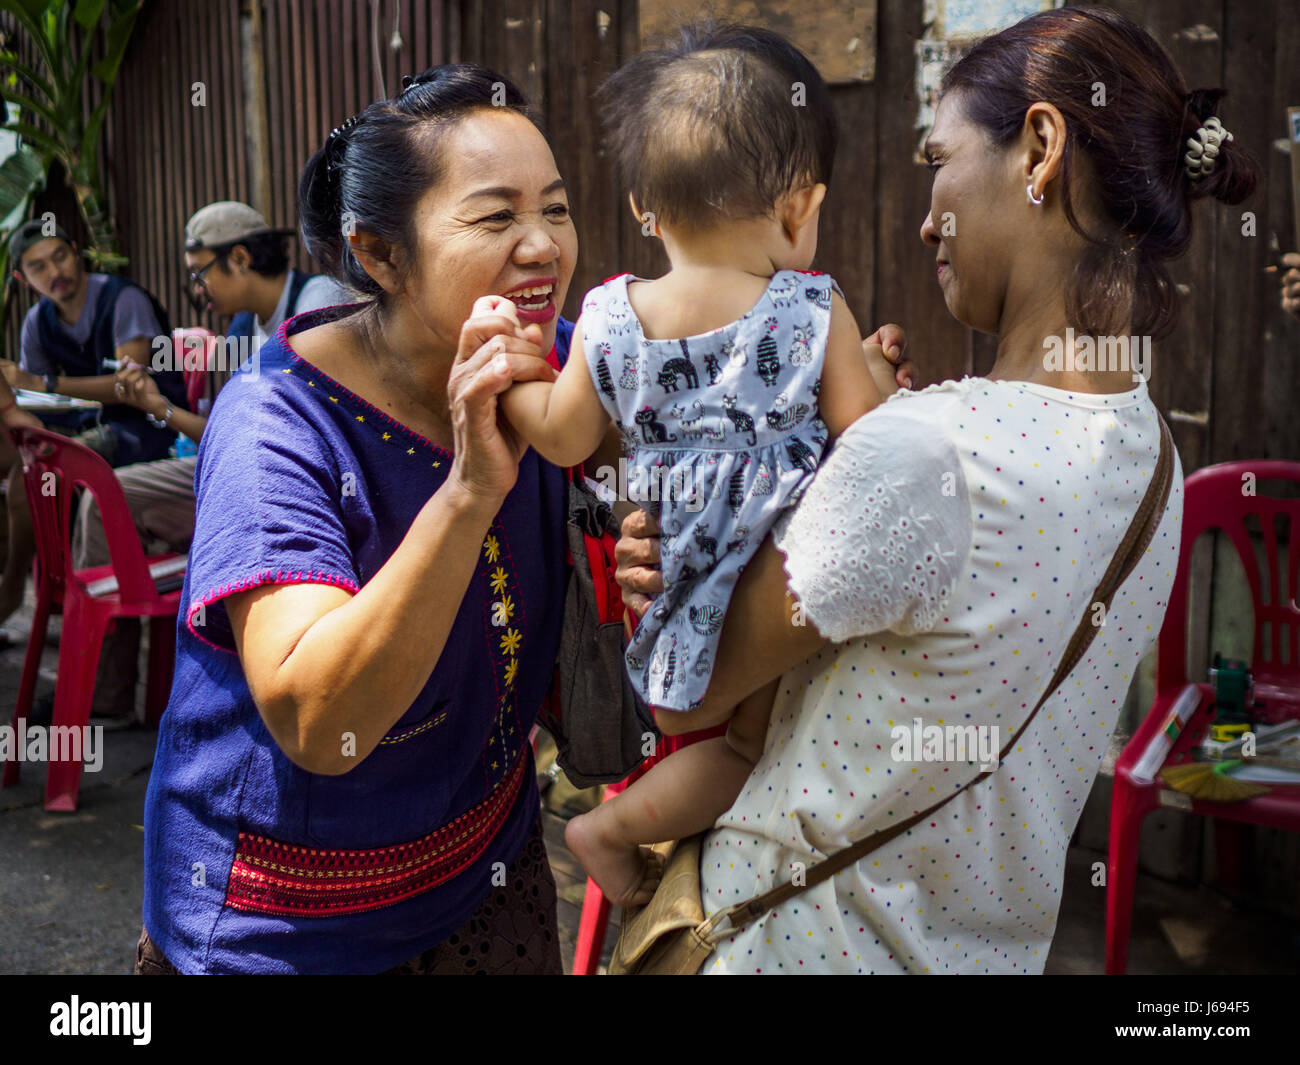 Bangkok, Bangkok, Thailand. 20th May, 2017. A woman who lives in Pom Mahakan greets a neighbor's child in the old fort. The final evictions of the remaining families in Pom Mahakan, a slum community in a 19th century fort in Bangkok, have started. City officials are moving the residents out of the fort. NGOs and historic preservation organizations protested the city's action but city officials did not relent and started evicting the remaining families in early March. Credit: Jack Kurtz/ZUMA Wire/Alamy Live News Stock Photo